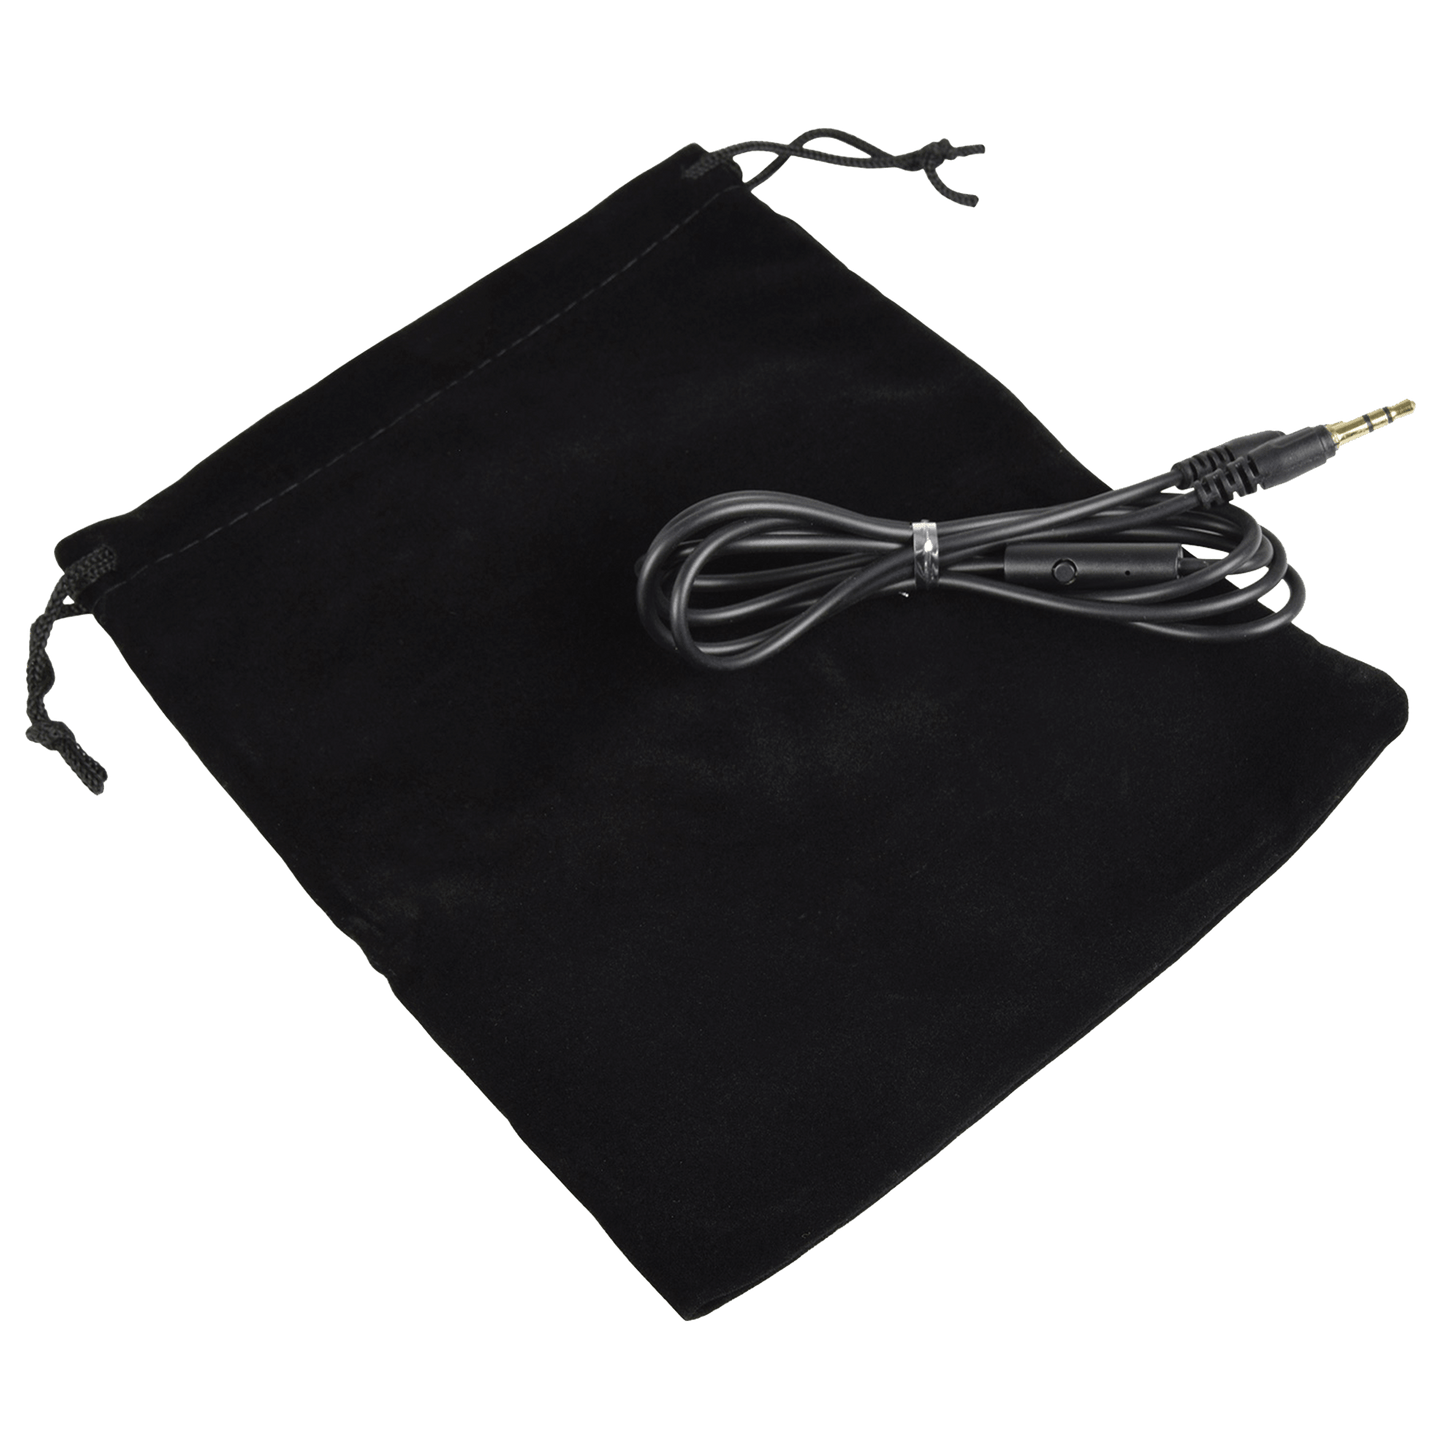 storage bag and aux cable included with headphones